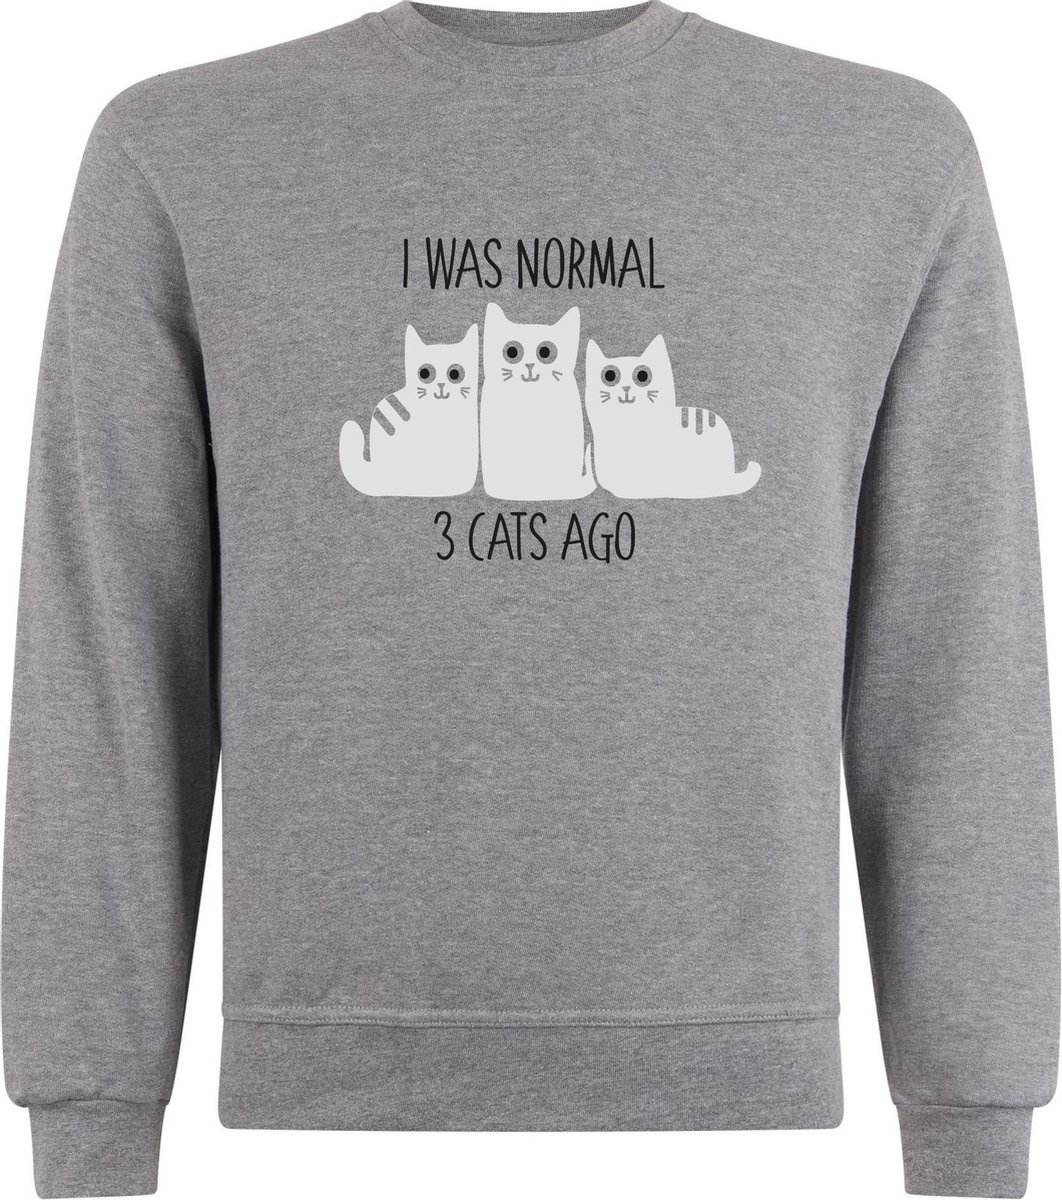 Sweater zonder capuchon - Jumper - Trui - Vest - Lifestyle sweater - Chill Sweater - Kat - Cat - I was normal 3 cats ago - S.Grey - M